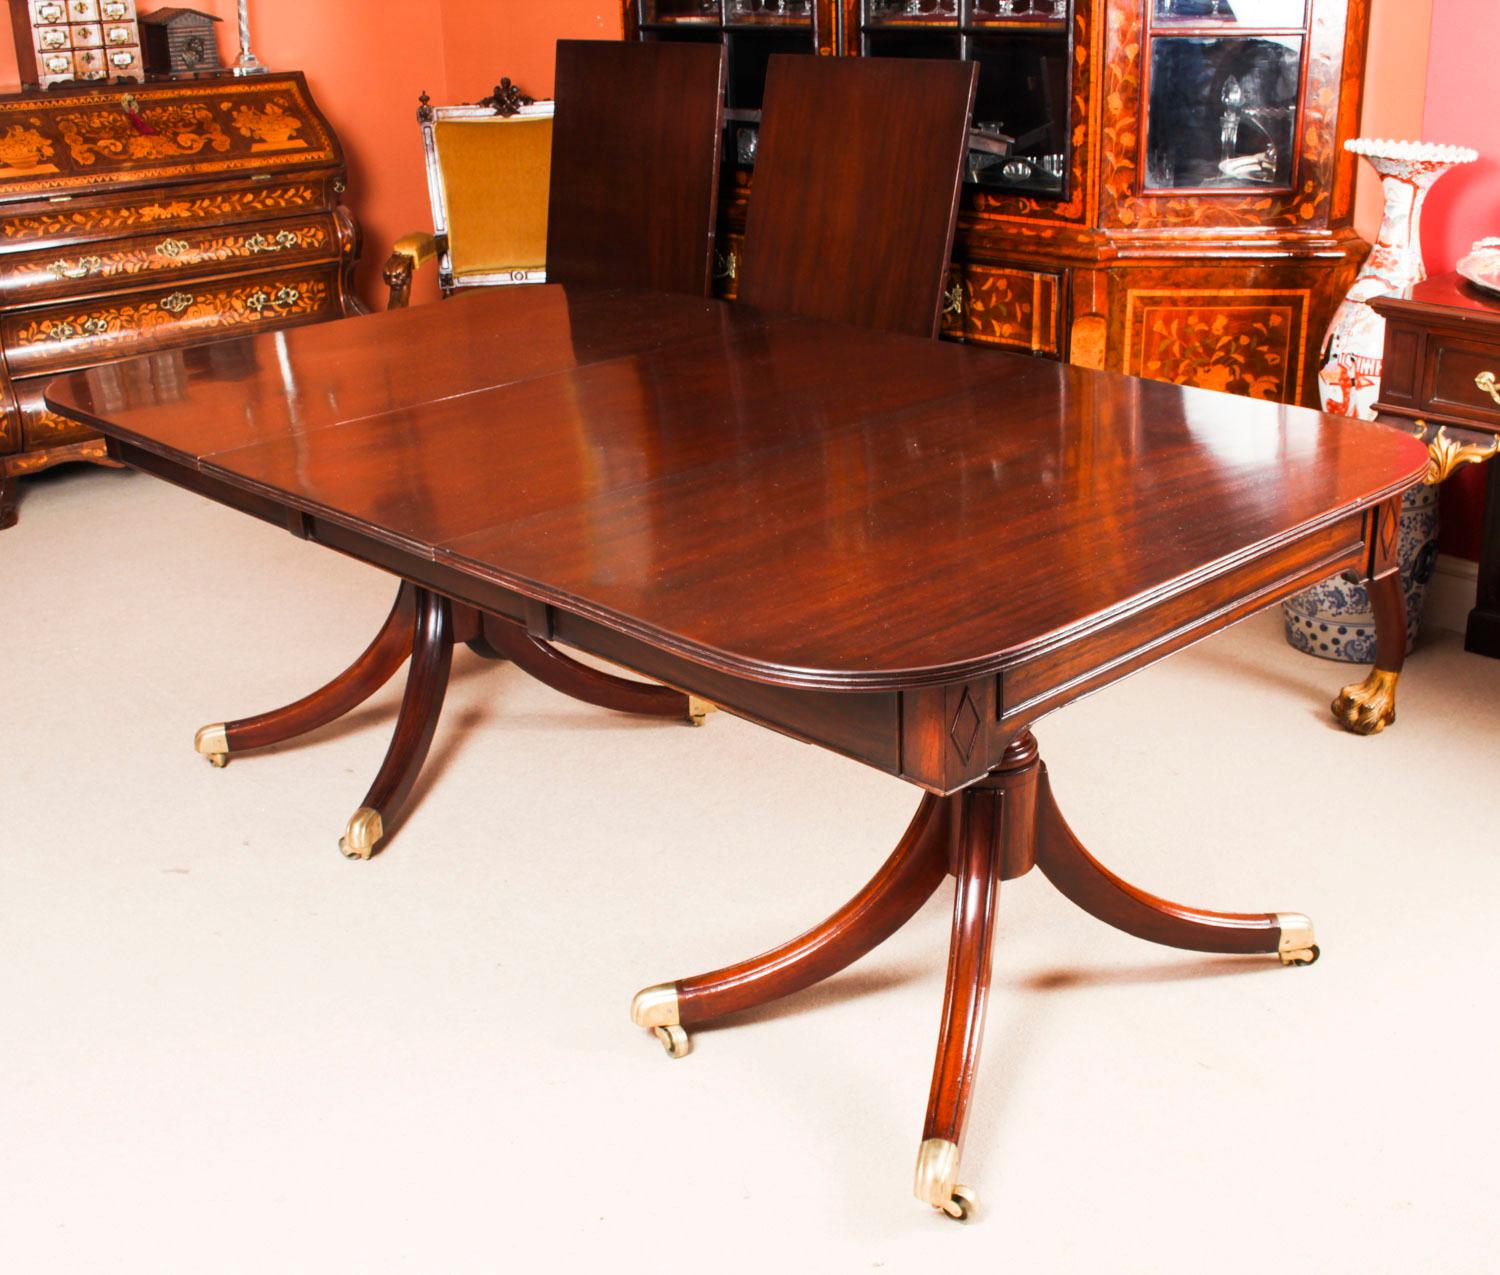 Mahogany Antique Twin Pillar Regency Dining Table 19th Century and 8 Vintage Chairs